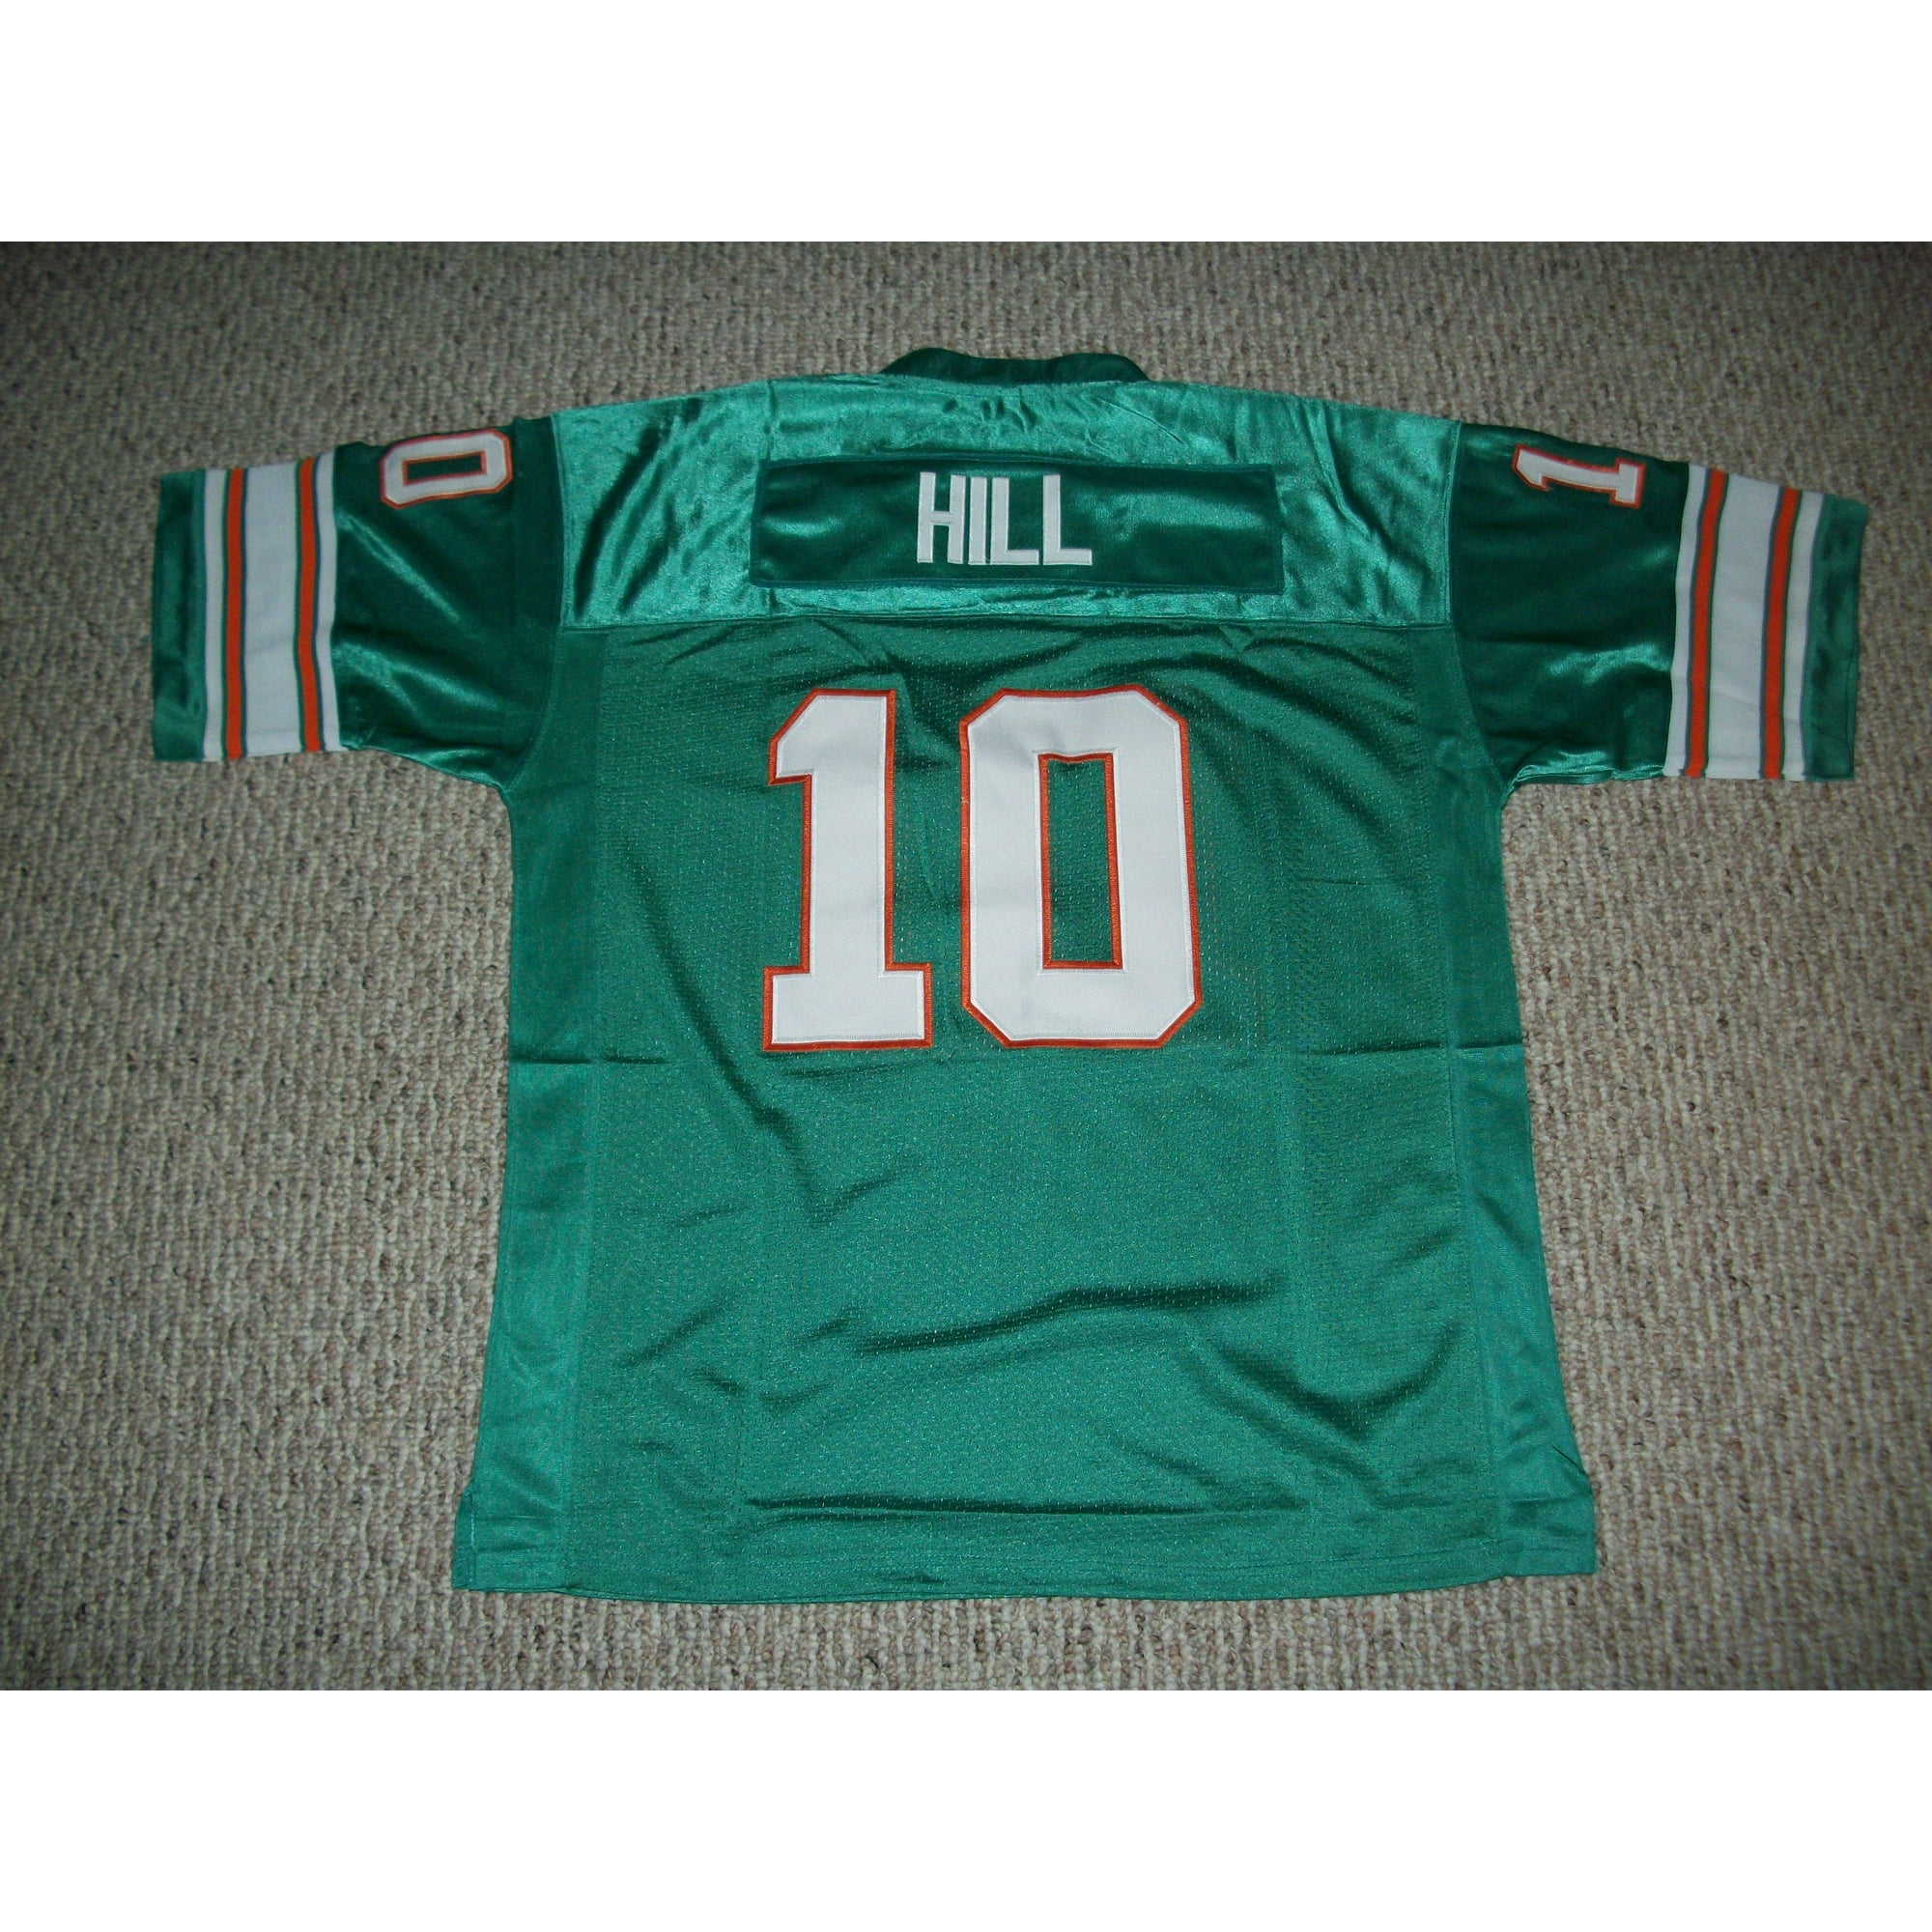 dolphins hill jersey youth